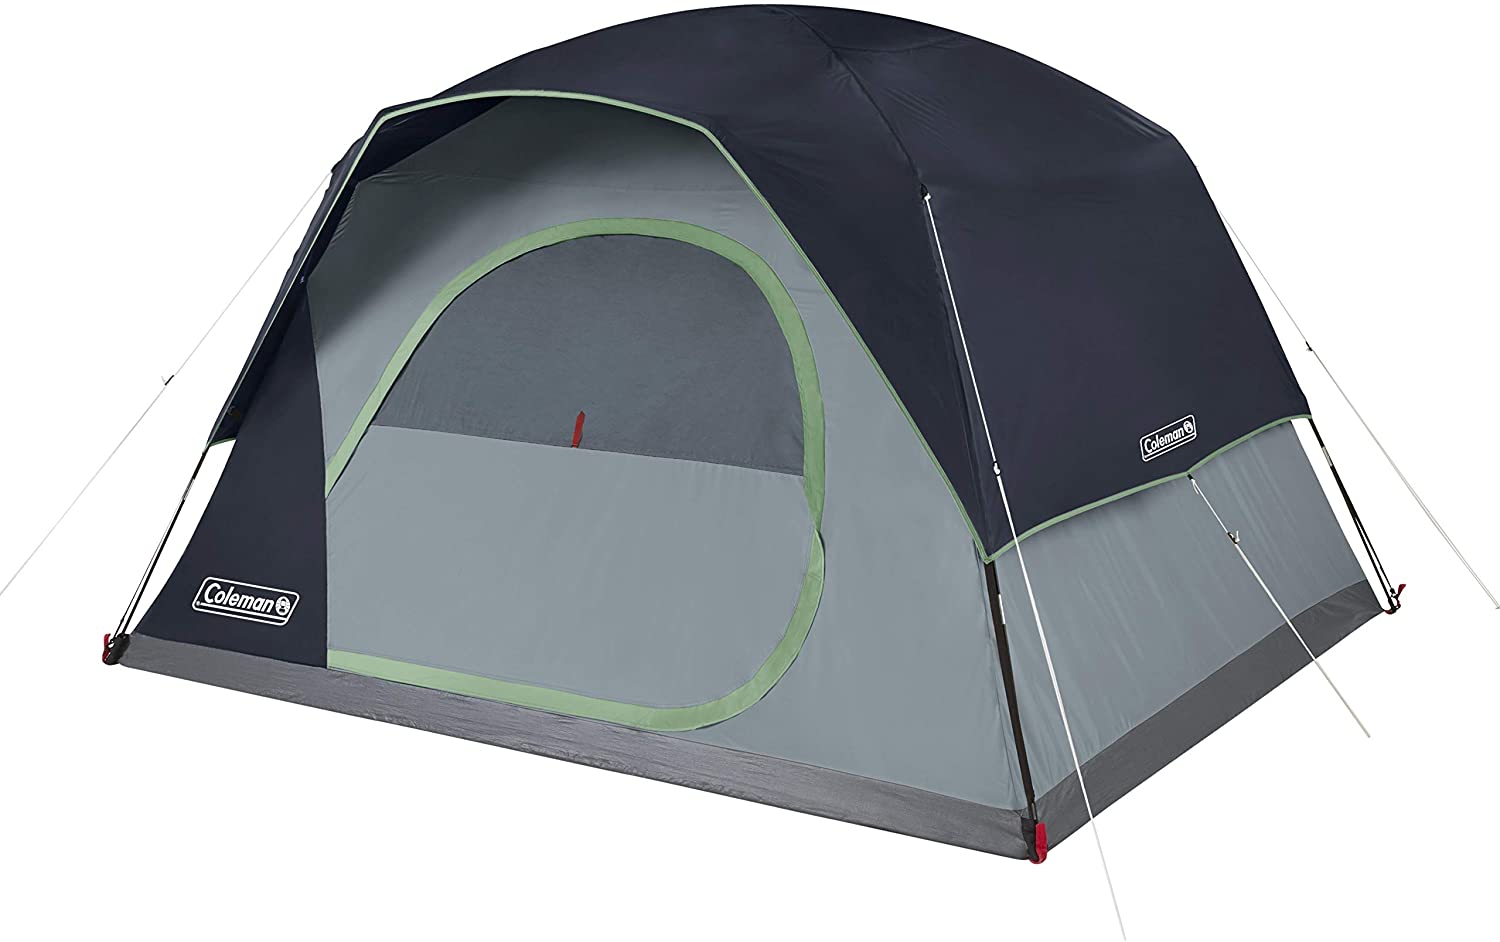 CORE 9 Person Tent  Large Multi Room Tent for Family with Full